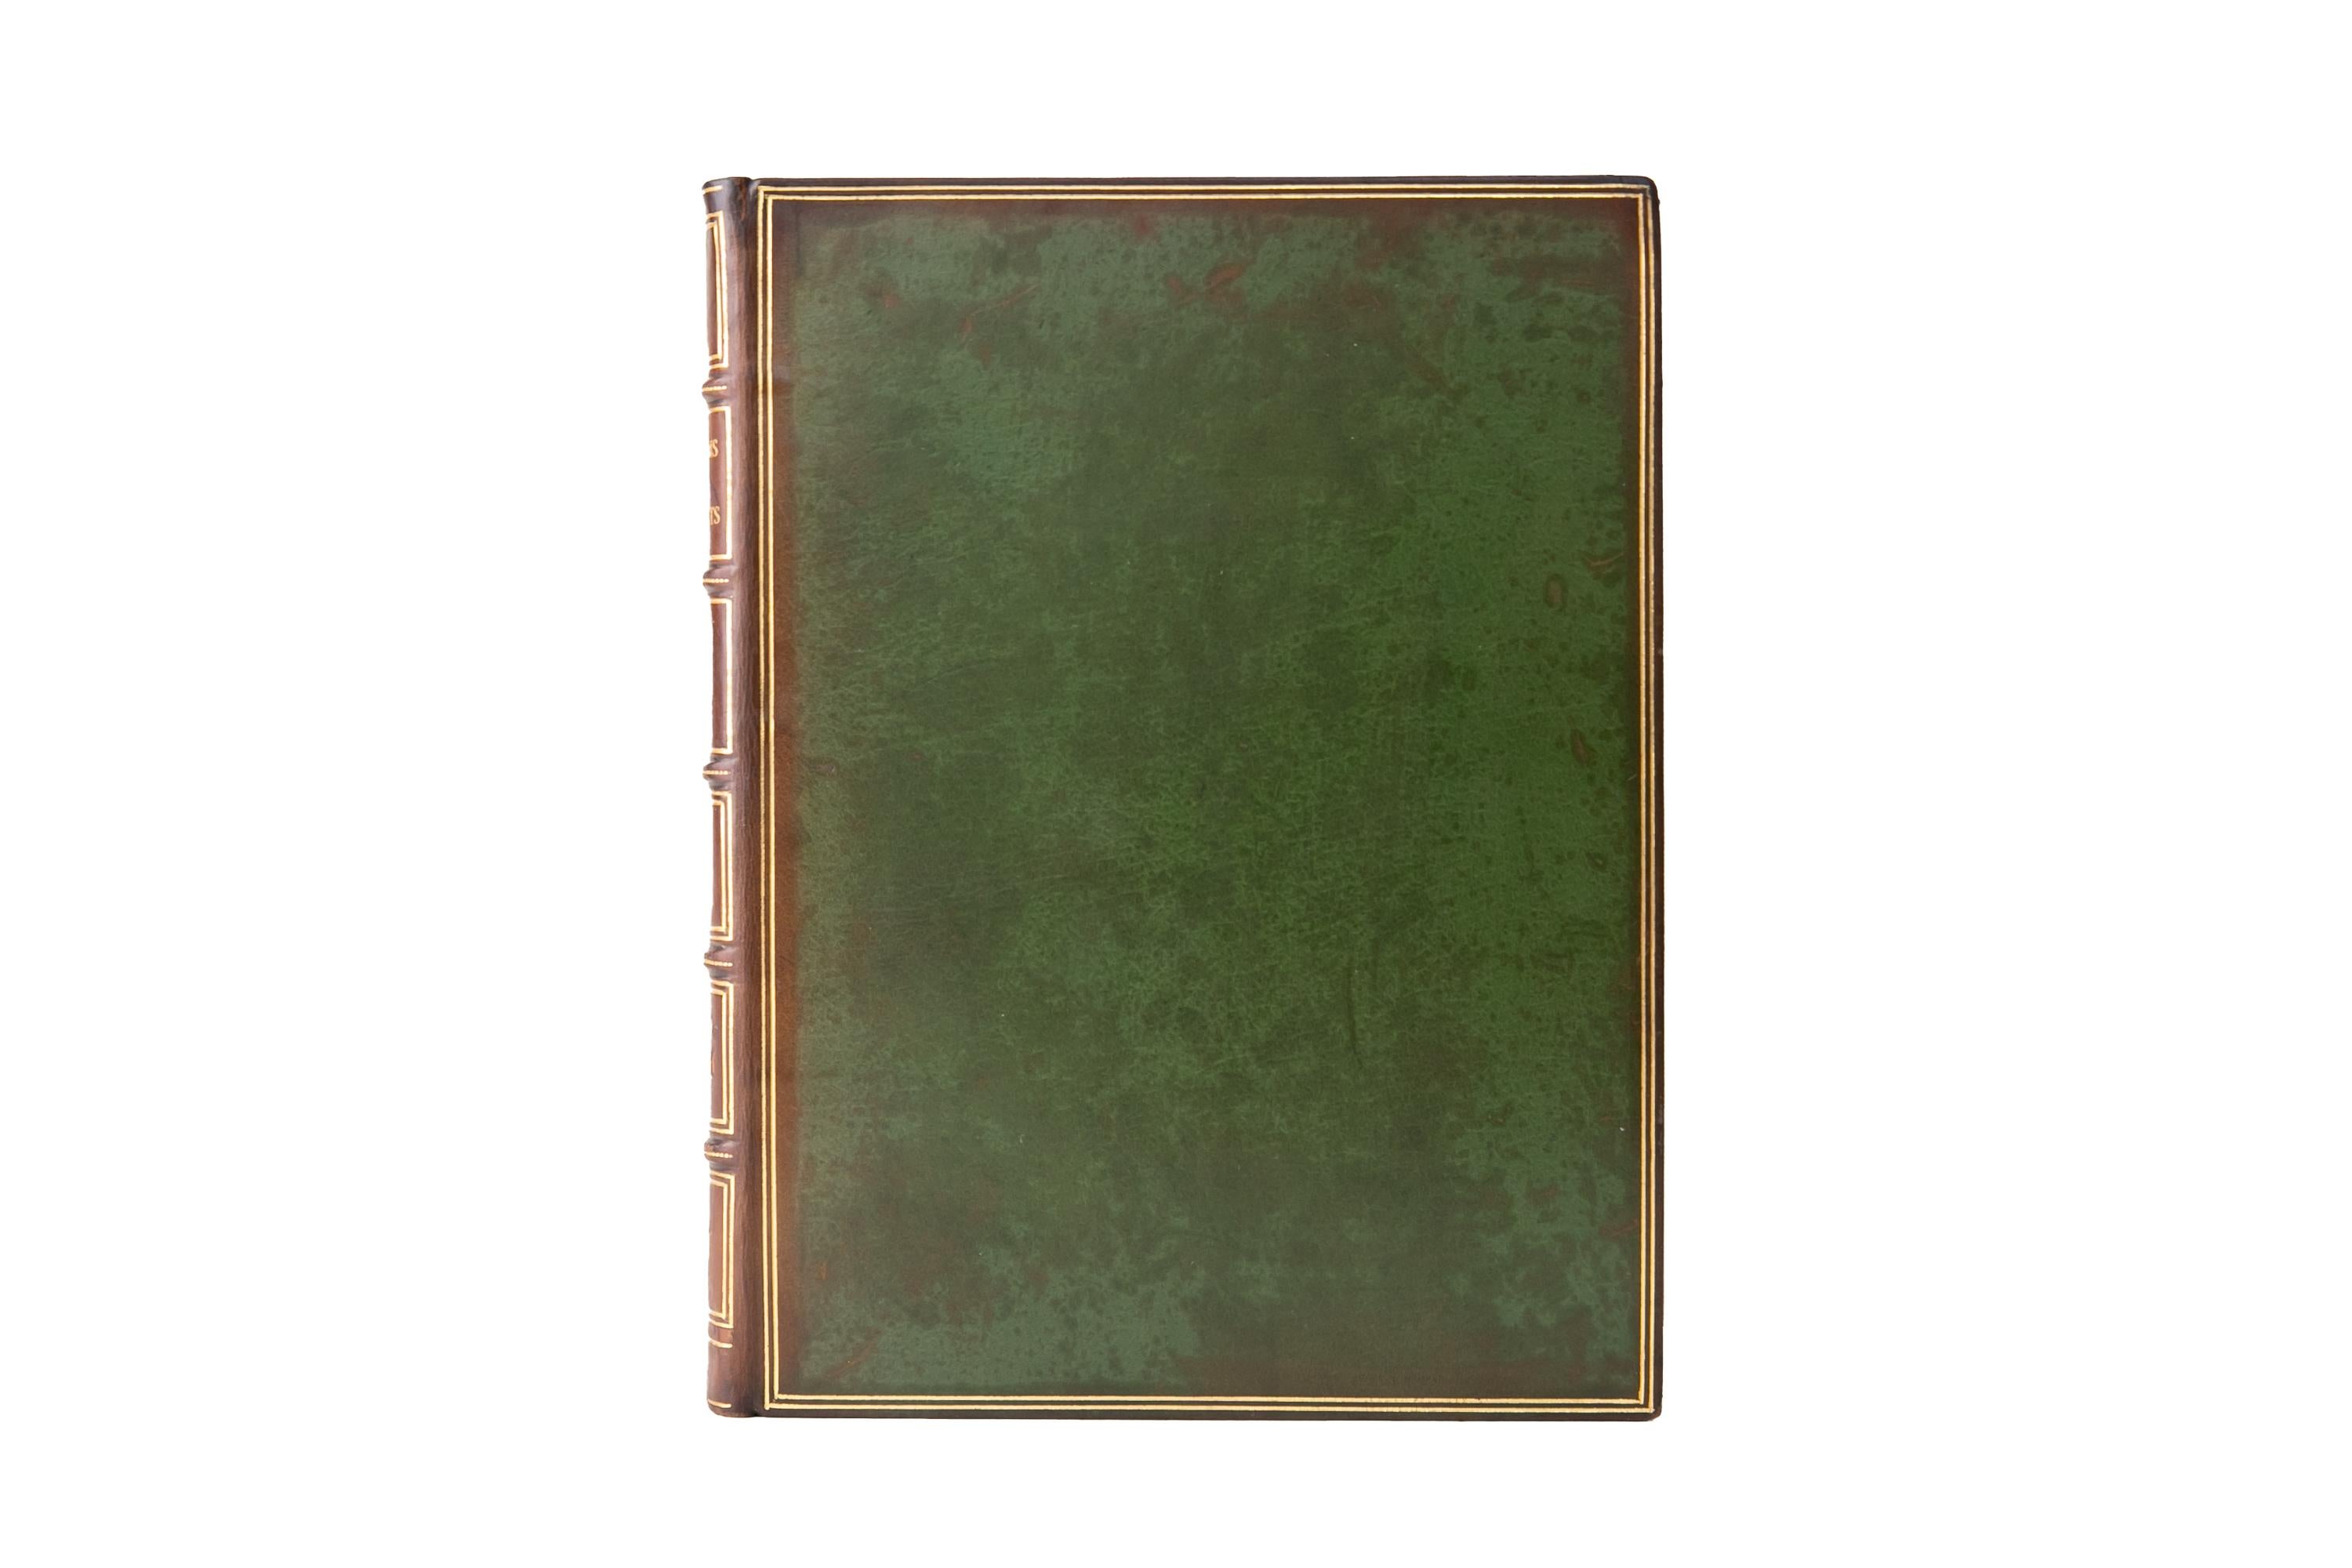 2 Volumes. John Keats, The Poems. Bound by Riviere in full green calf. The Covers and raised band spines are gilt-tooled. top edges gilt with gilt-tooled dentelles and marbled endpapers. Arranged in chronological order with a preface by Sidney